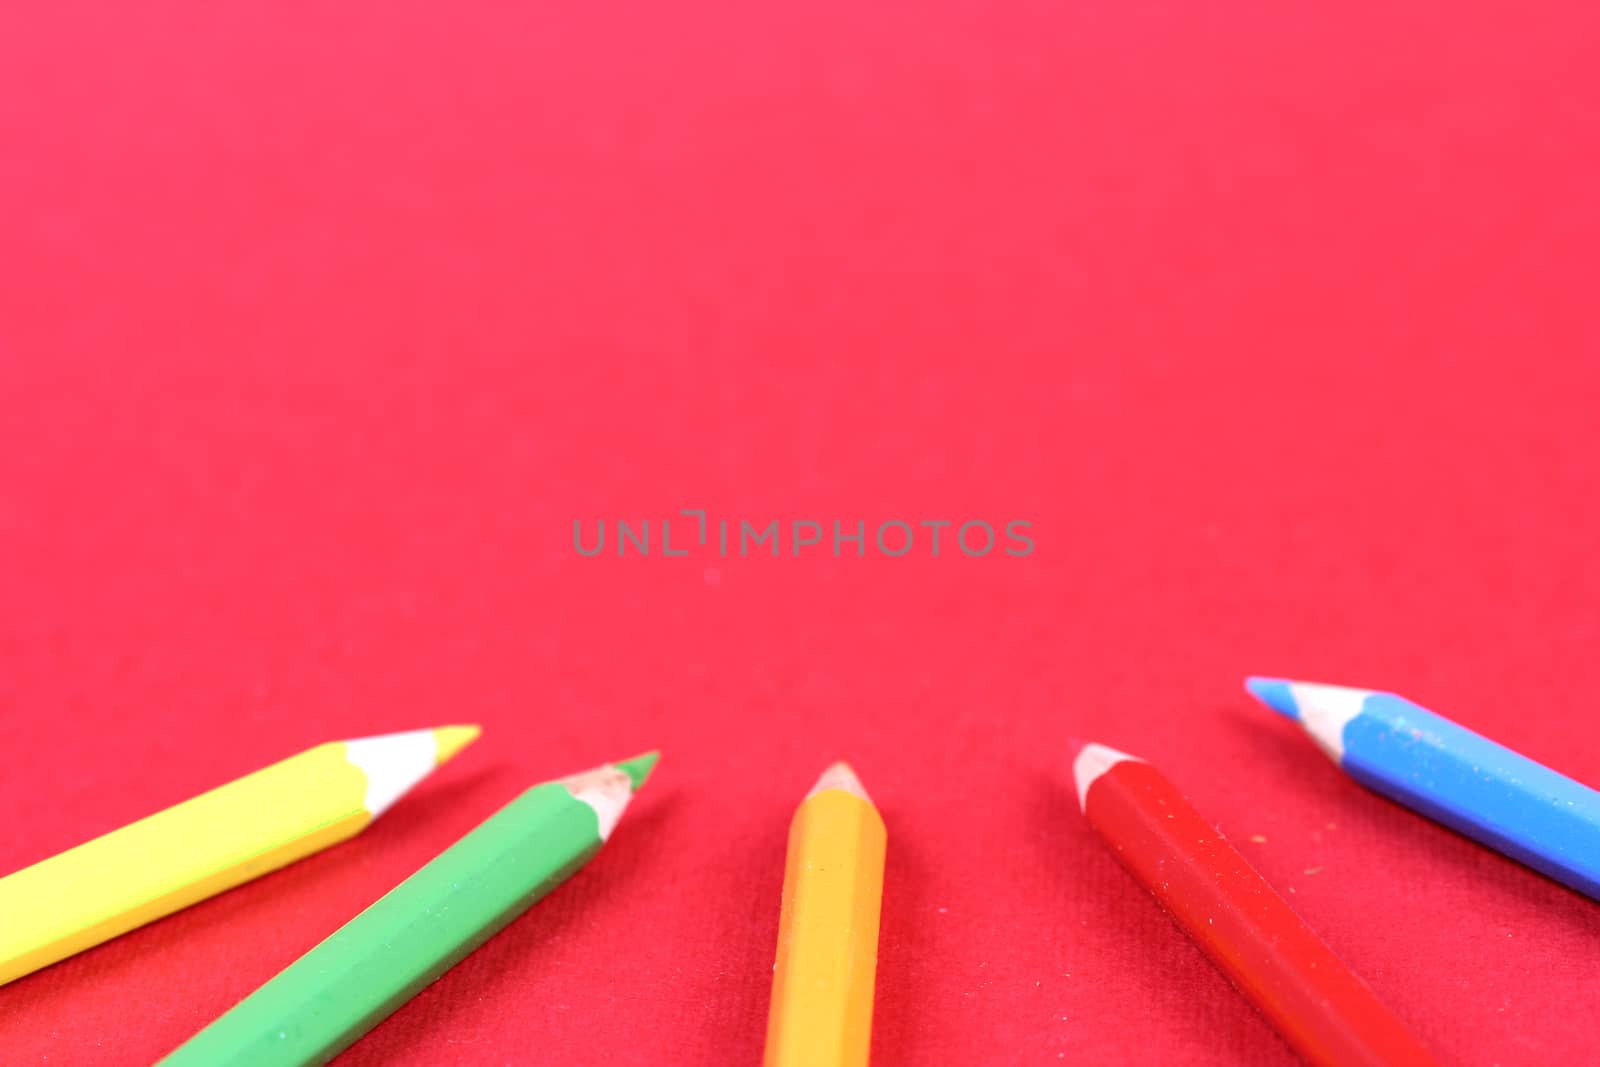 Close-up picture of sharp pencils.